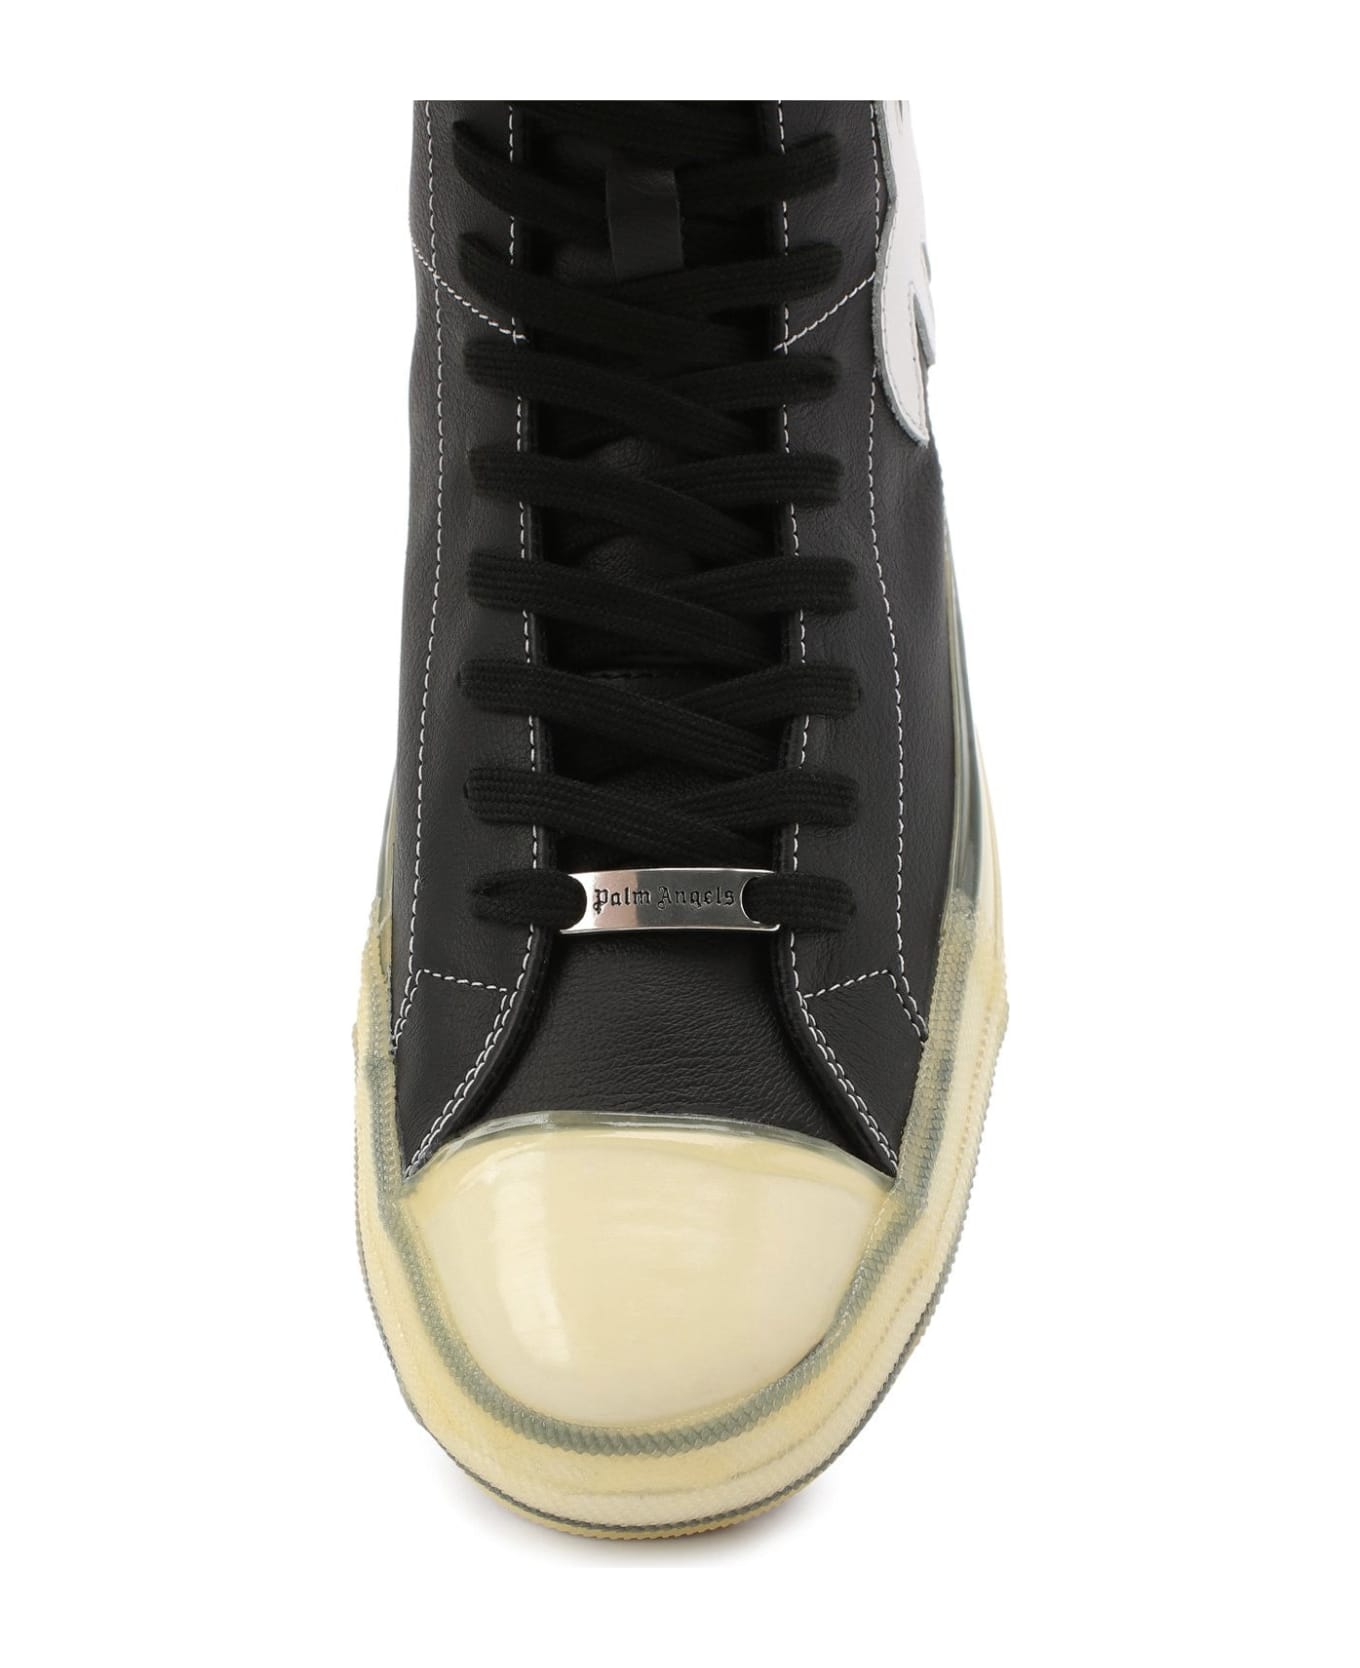 Palm Angels High-top Vulcanized Sneakers - Black